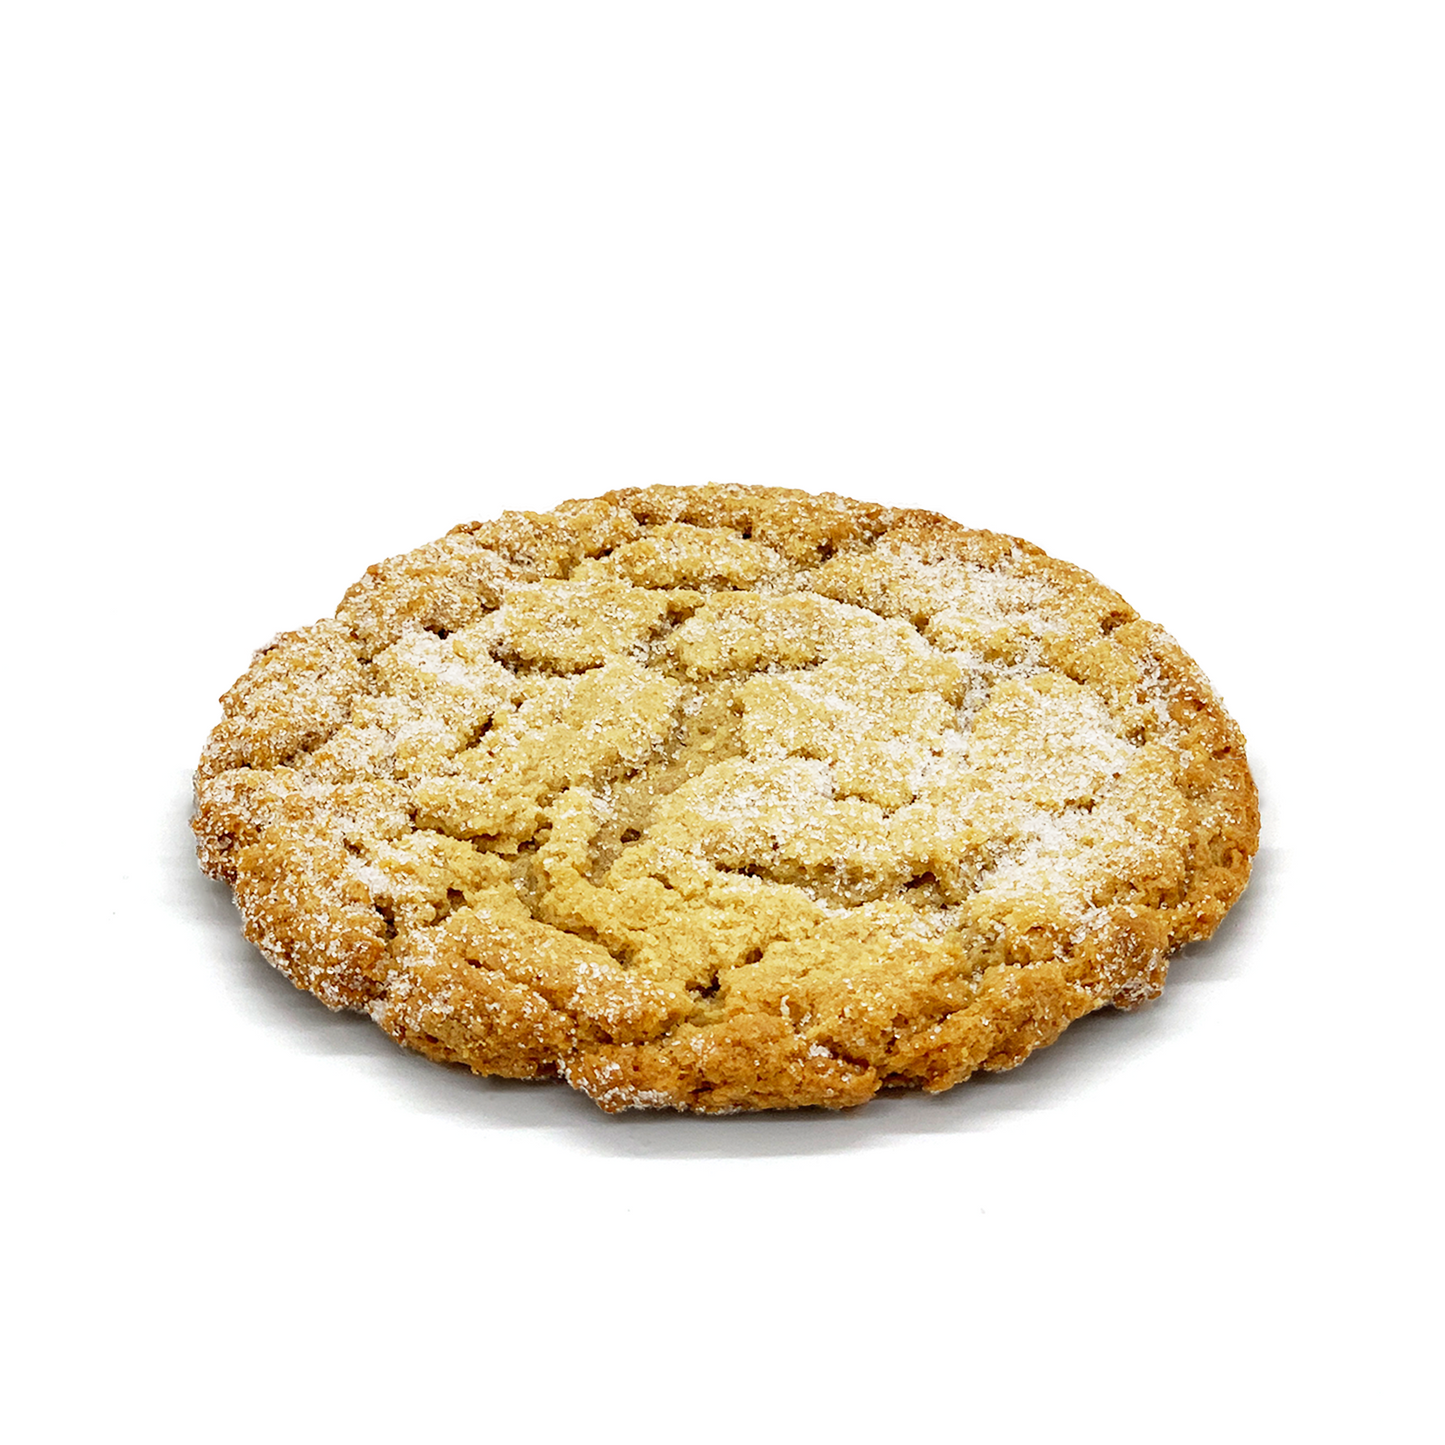 Giant Peanut Butter Cookie